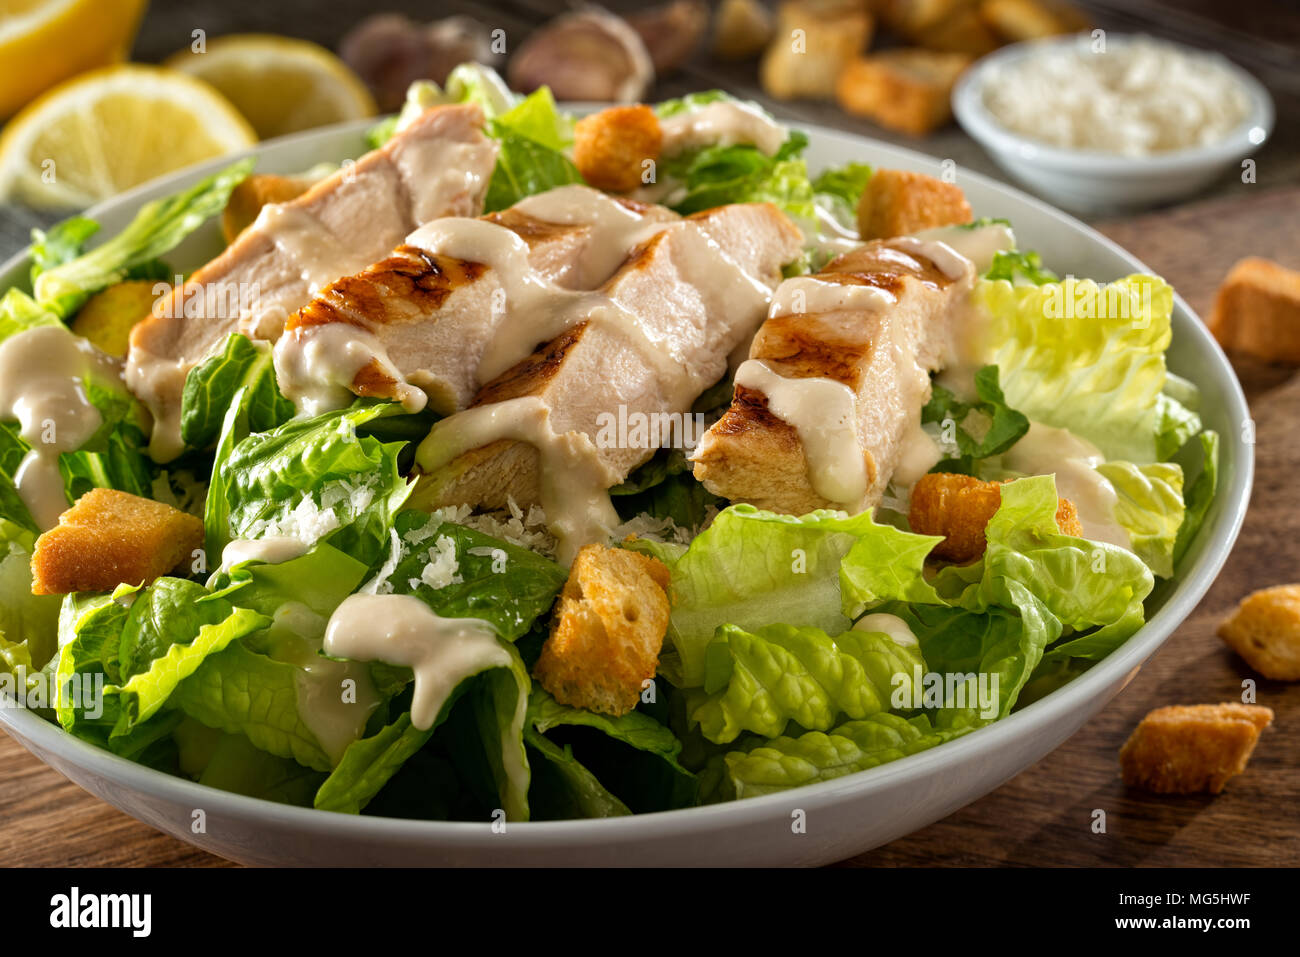 A delicious chicken caesar salad with parmesan cheese, dressing and croutons. Stock Photo